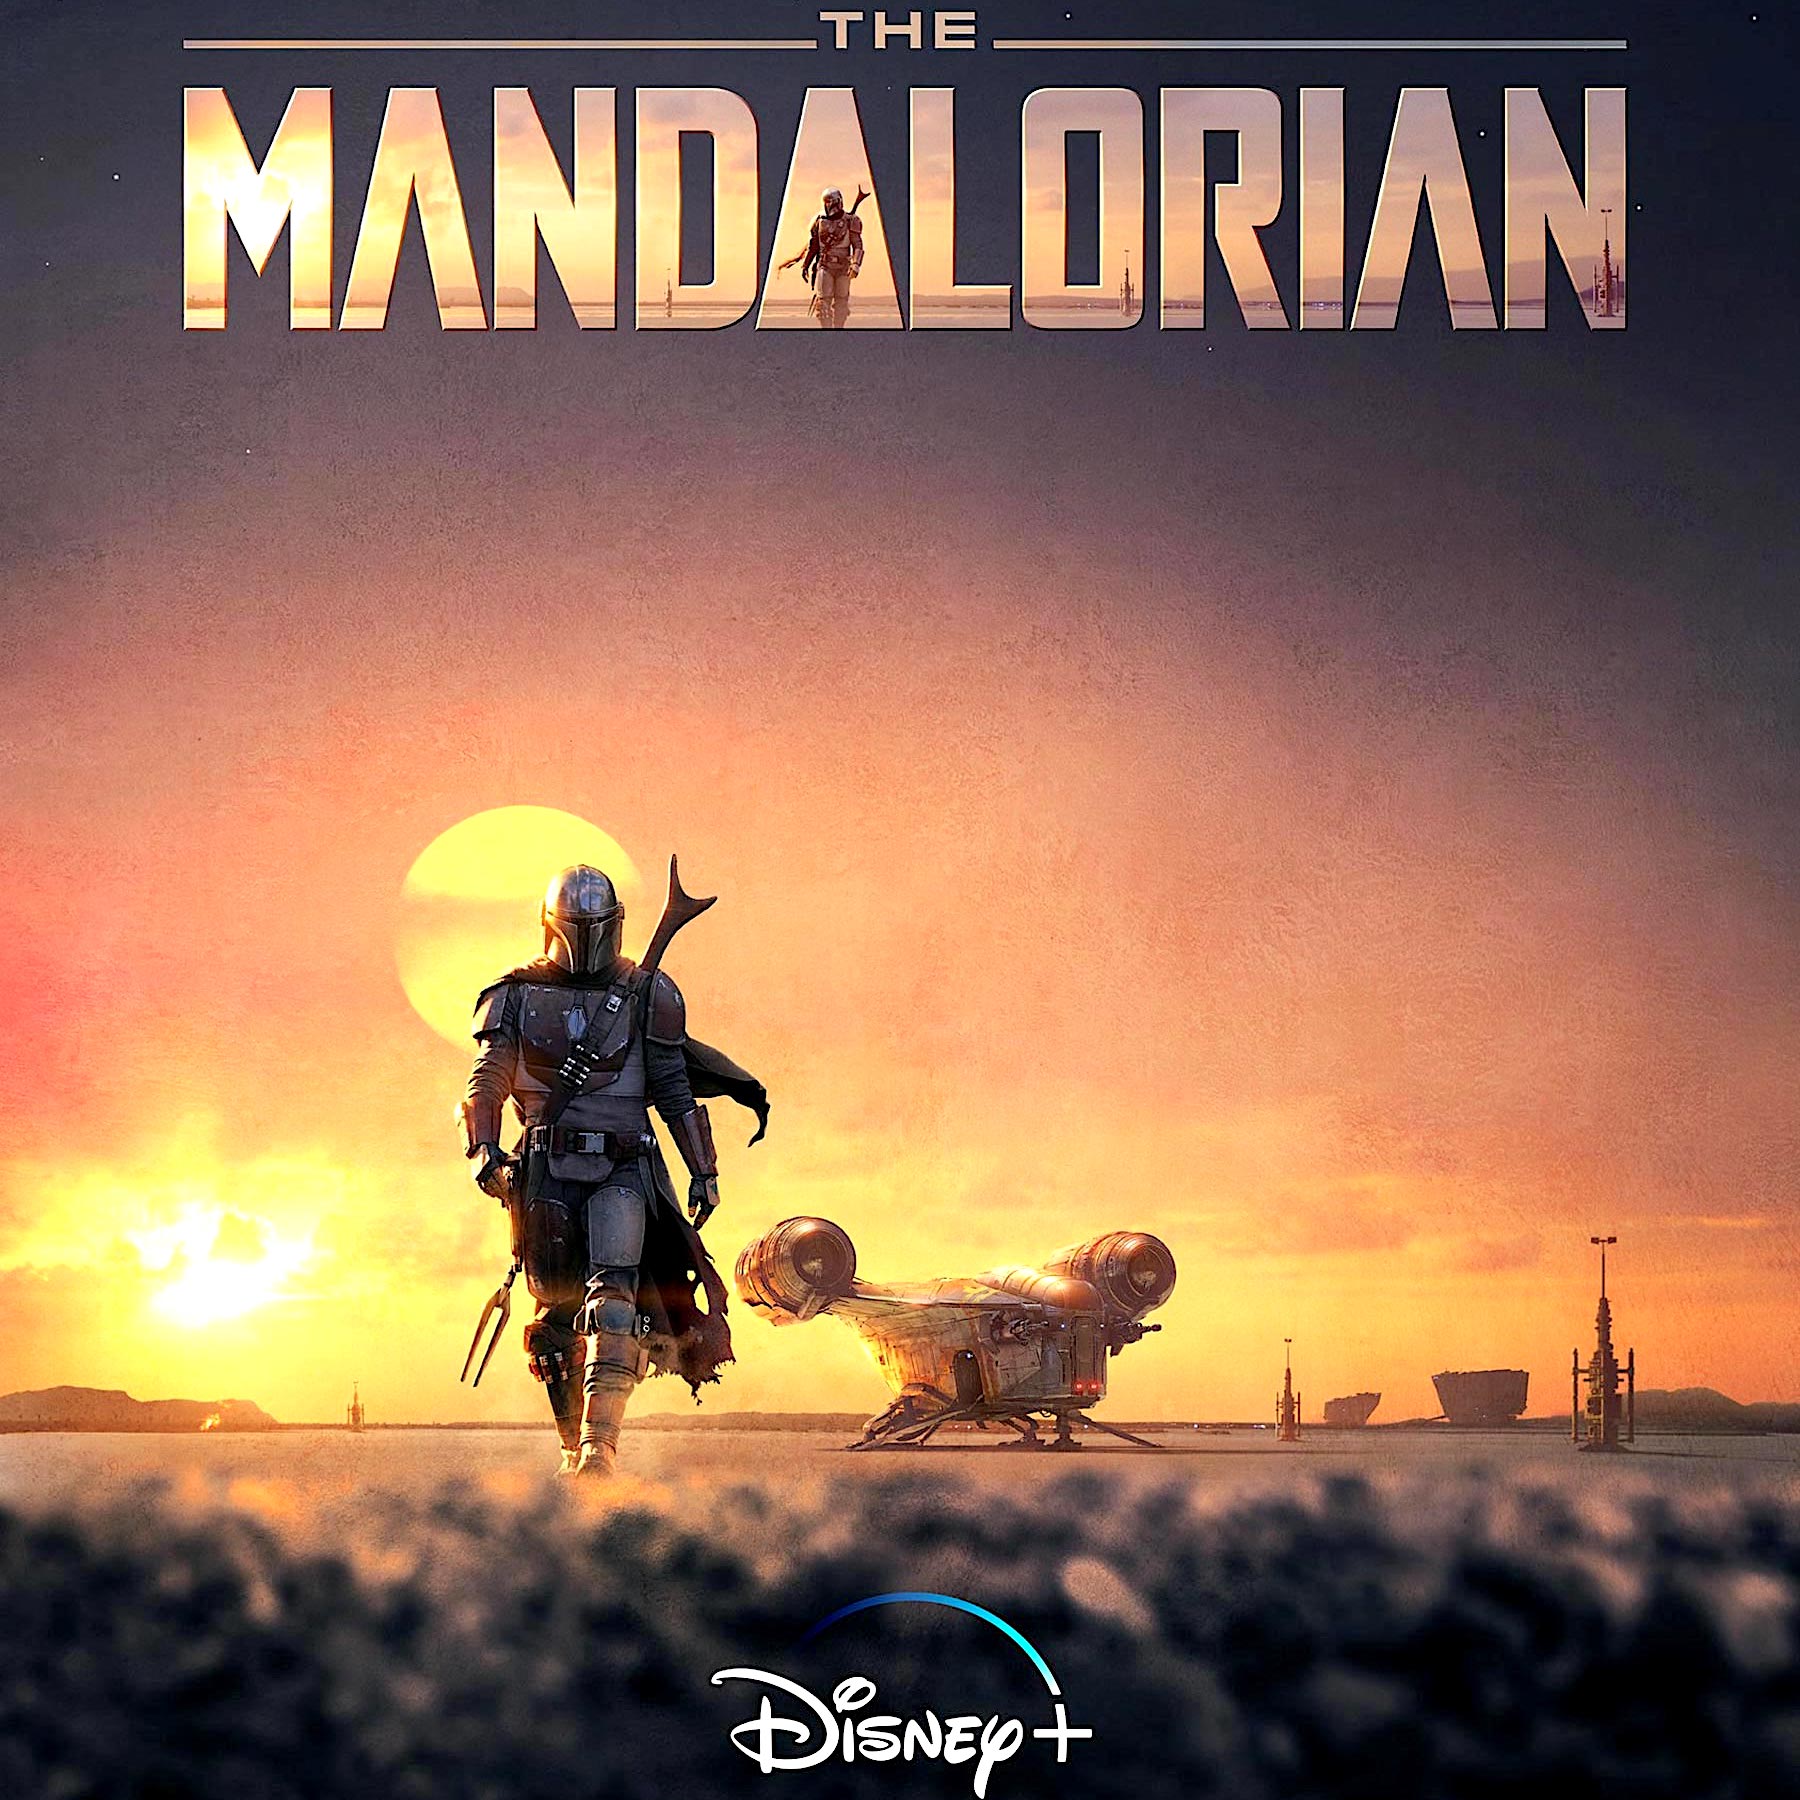 Disney's "The Mandalorian" Trailer with The Hit House composer Dan Diaz & William August Hunt's contributions.